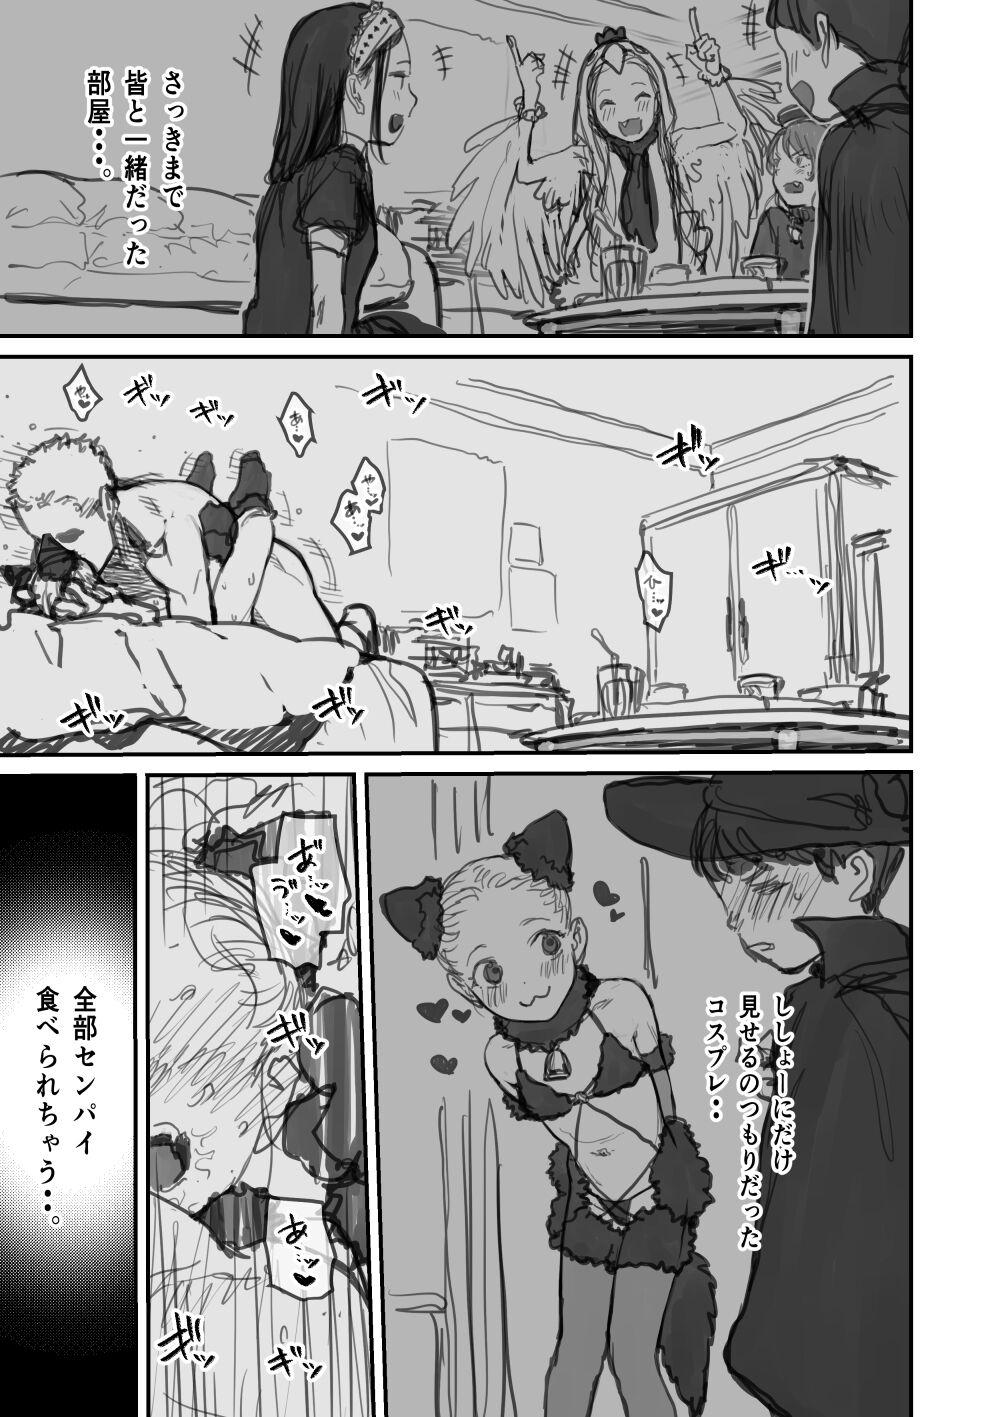 Style 【?IFルート?】IFIFIFIFIFIFIF【?IFルート?】 Sexo - Page 3